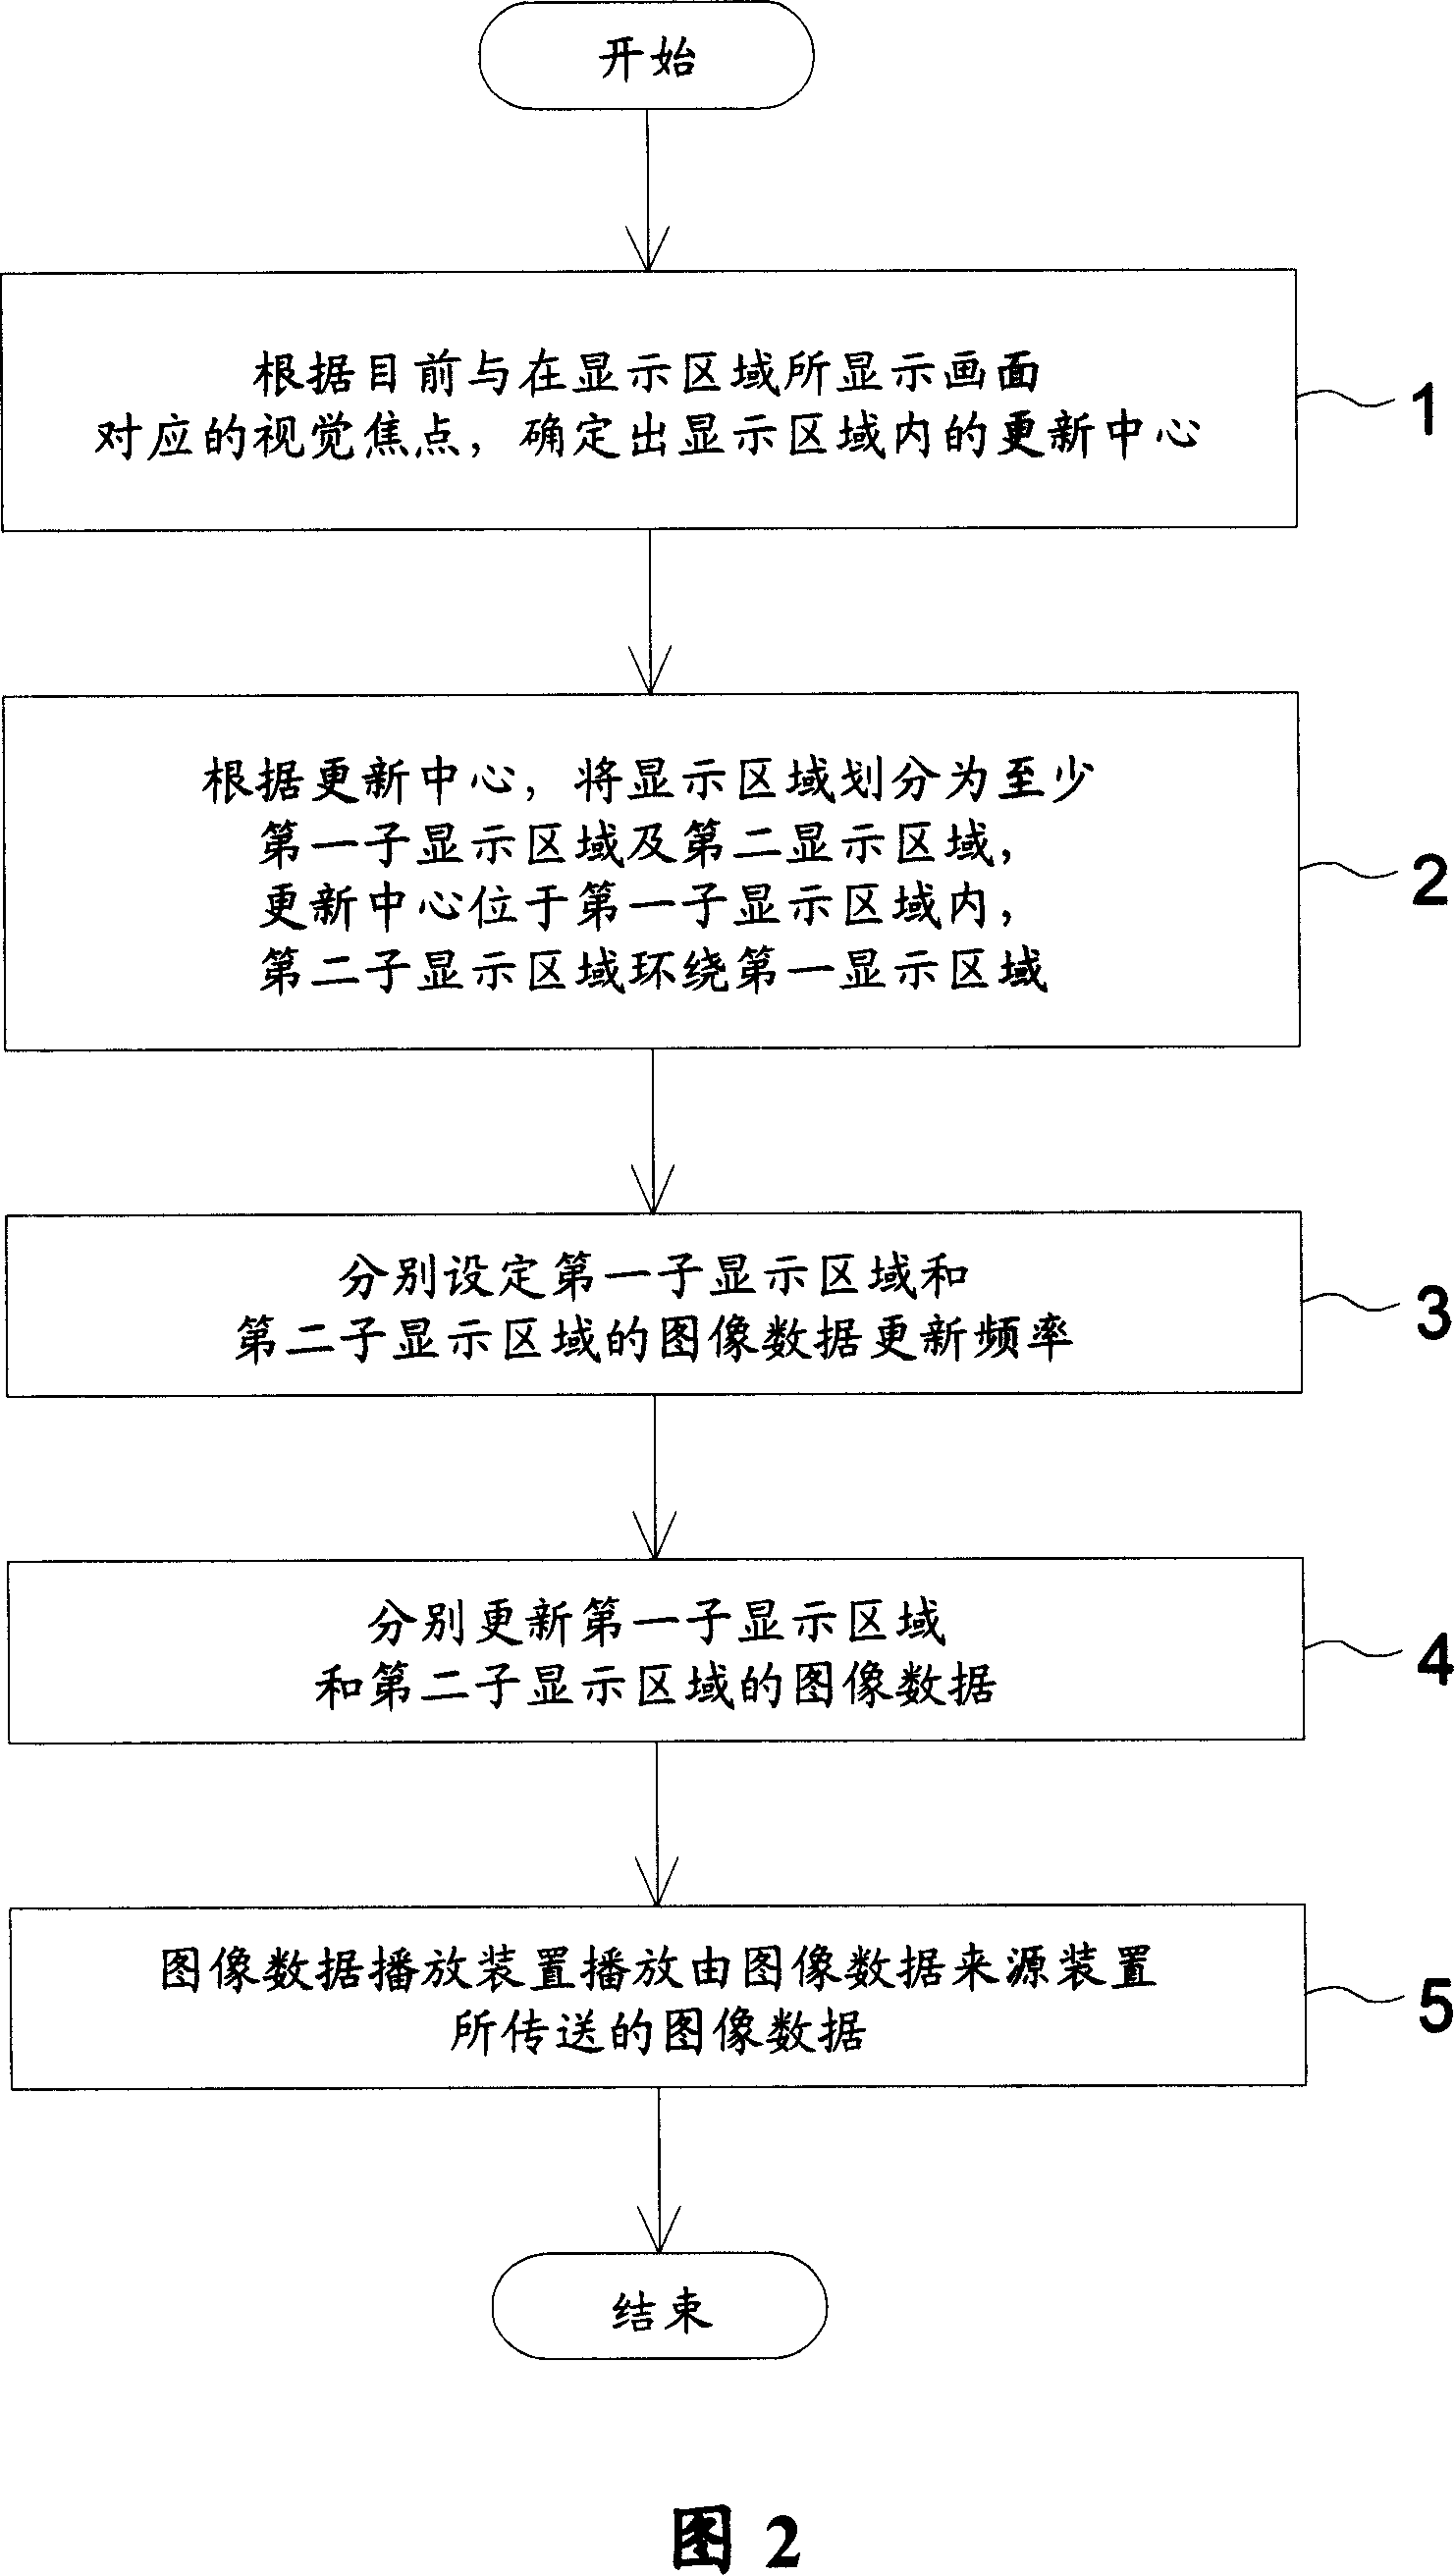 Image data updating method and broadcasting system using the same